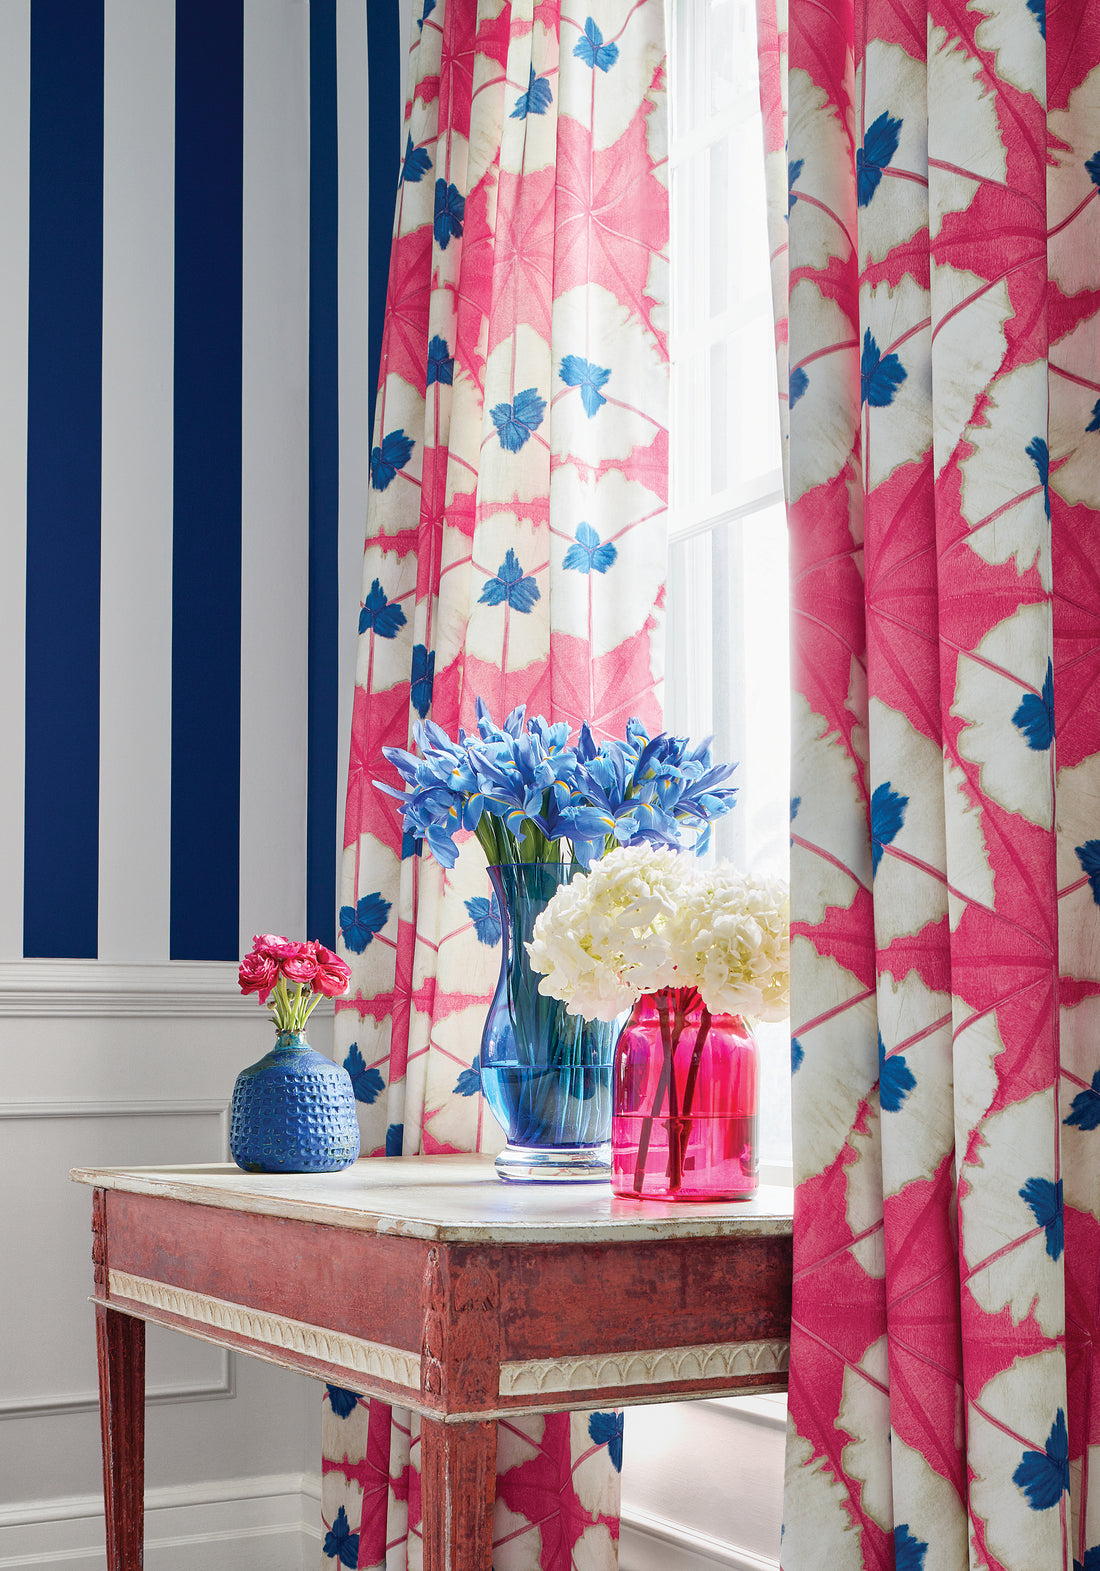 Backdrop of Sunburst printed fabric in pink and blue color - pattern number F913087 by Thibaut in the Summer House collection